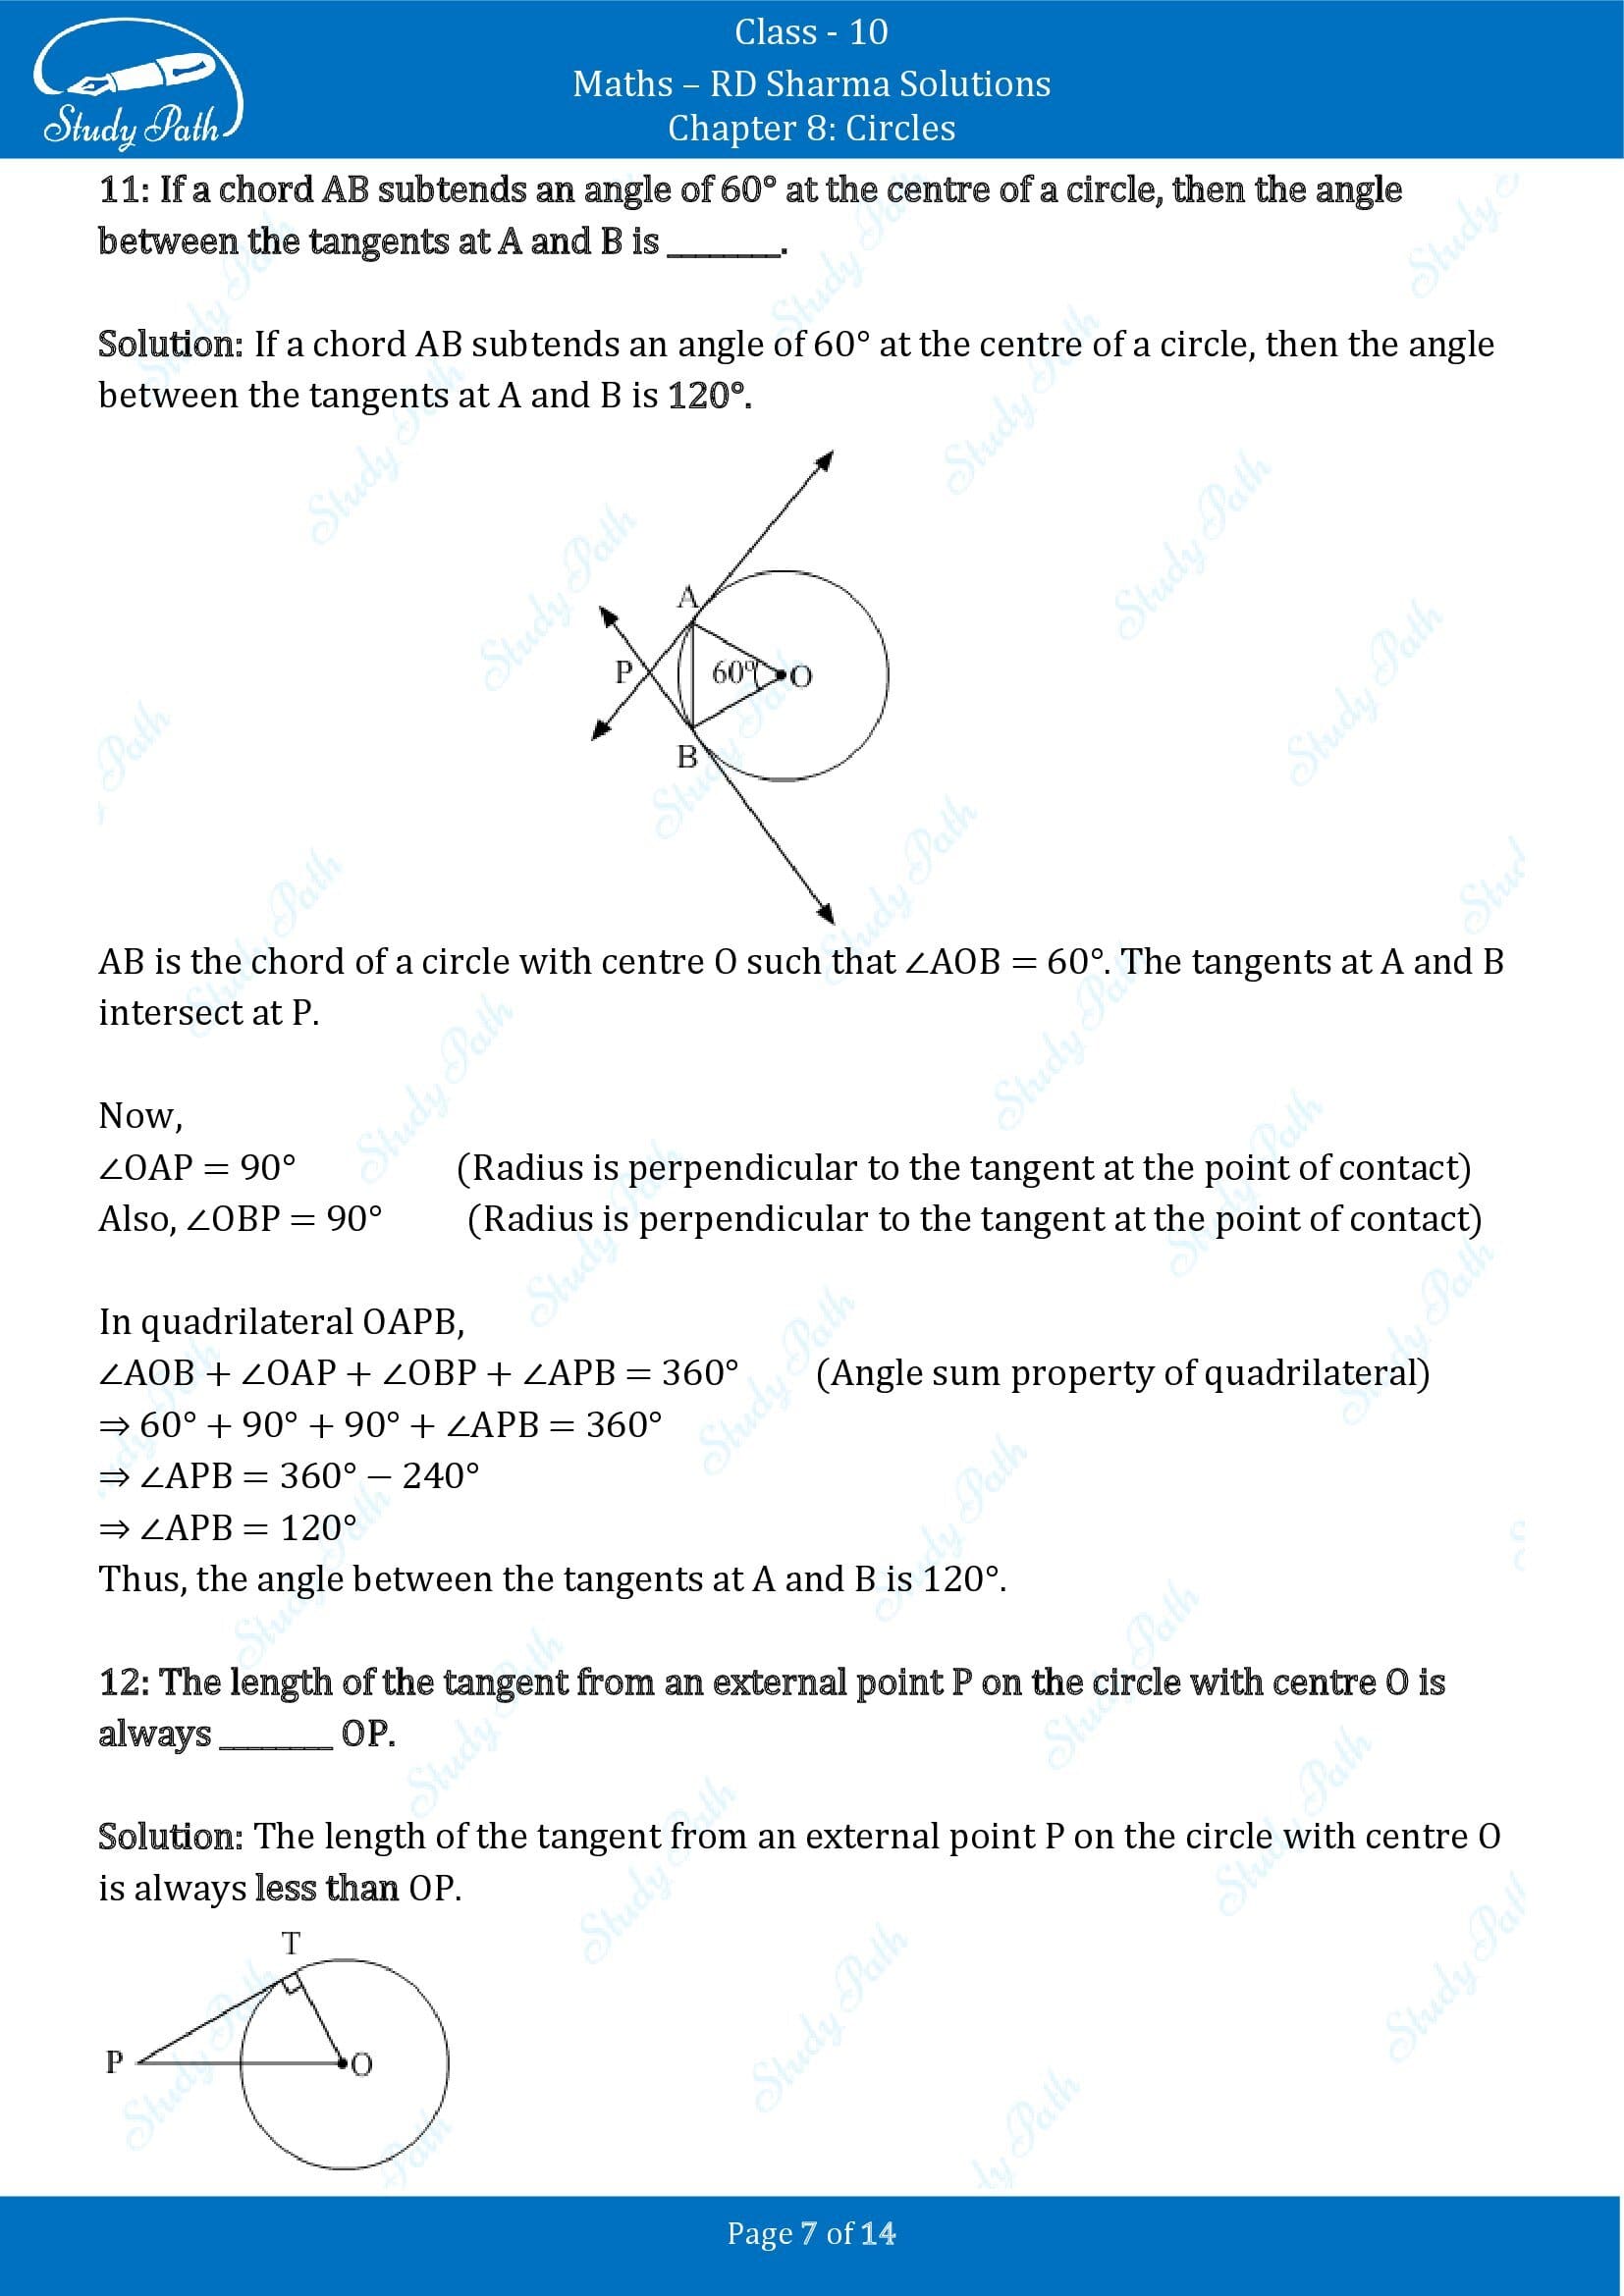 RD Sharma Solutions Class 10 Chapter 8 Circles Fill in the Blank Type Questions FBQs 00007